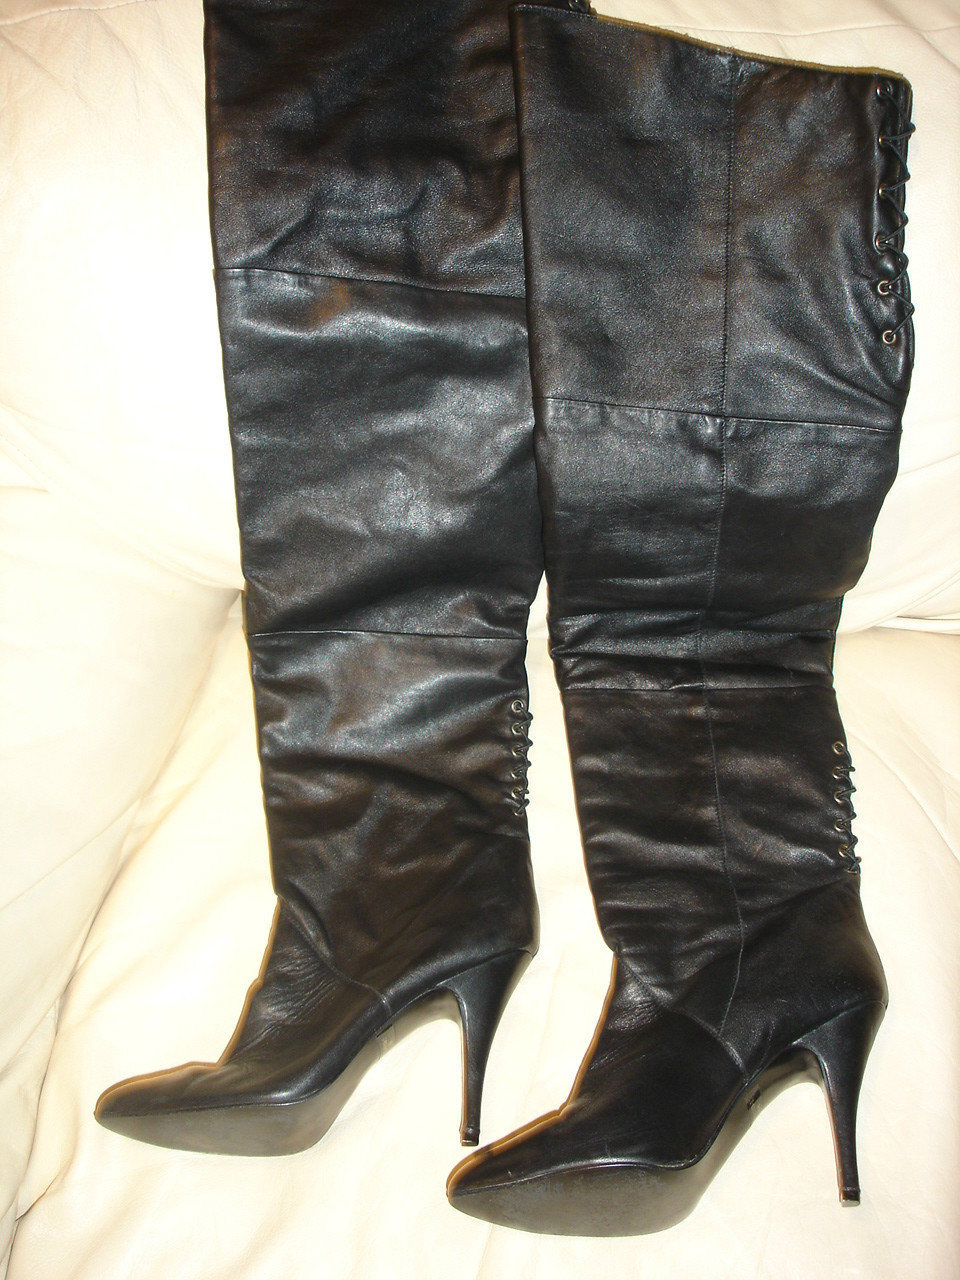 eBay Leather: An eBay boot seller does well with vintage Wild Pair boots